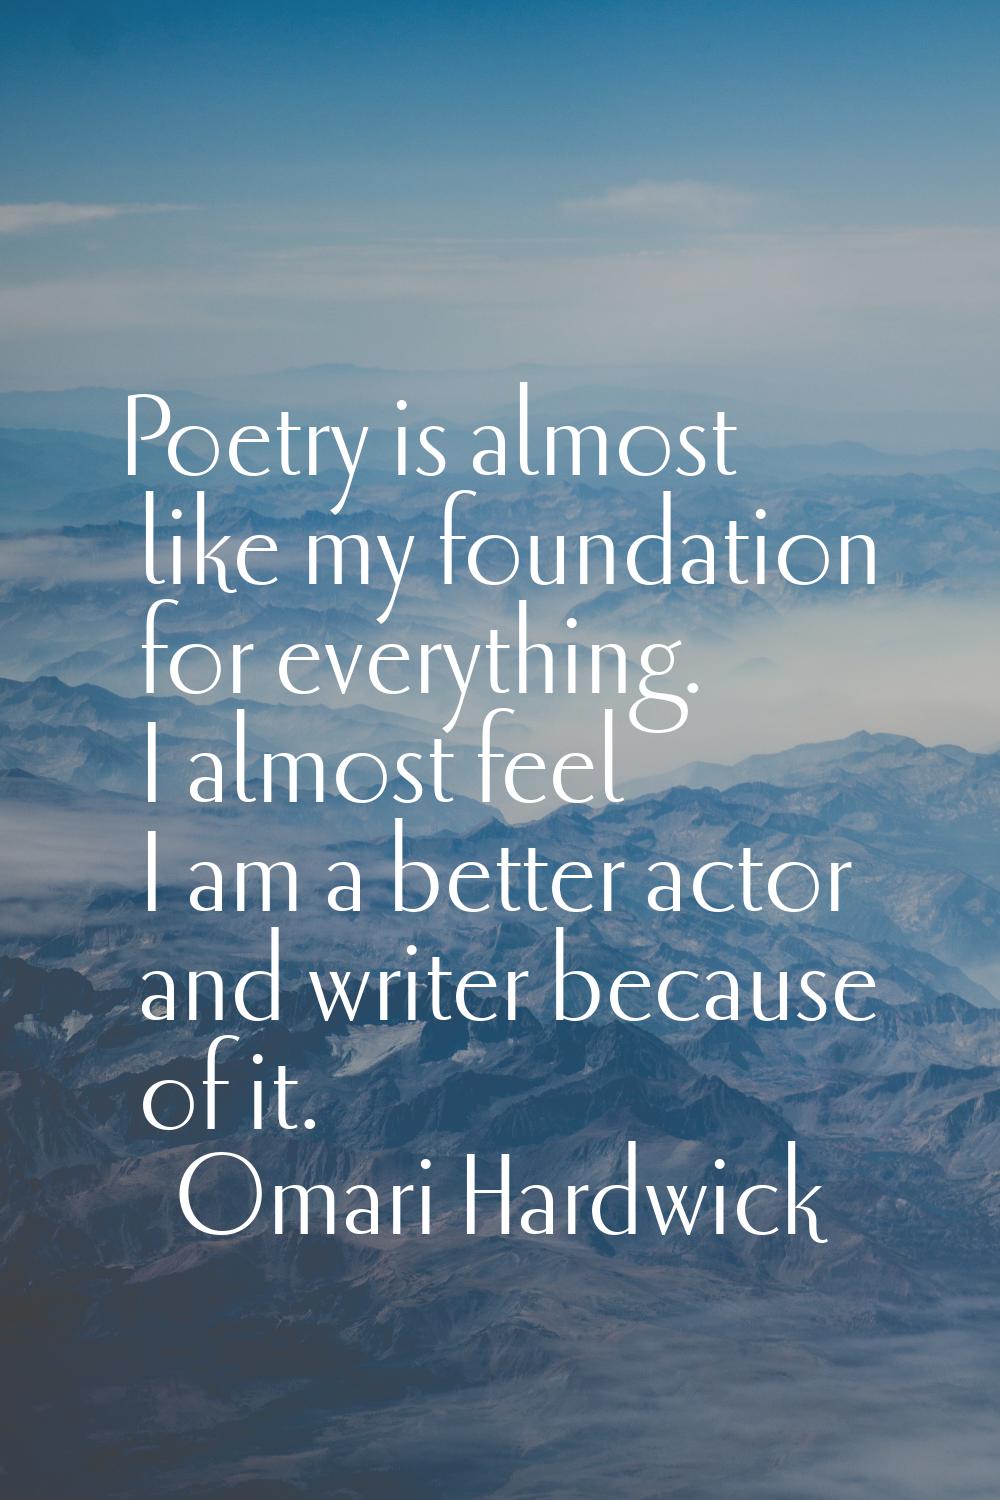 Poetry is almost like my foundation for everything. I almost feel I am a better actor and writer be